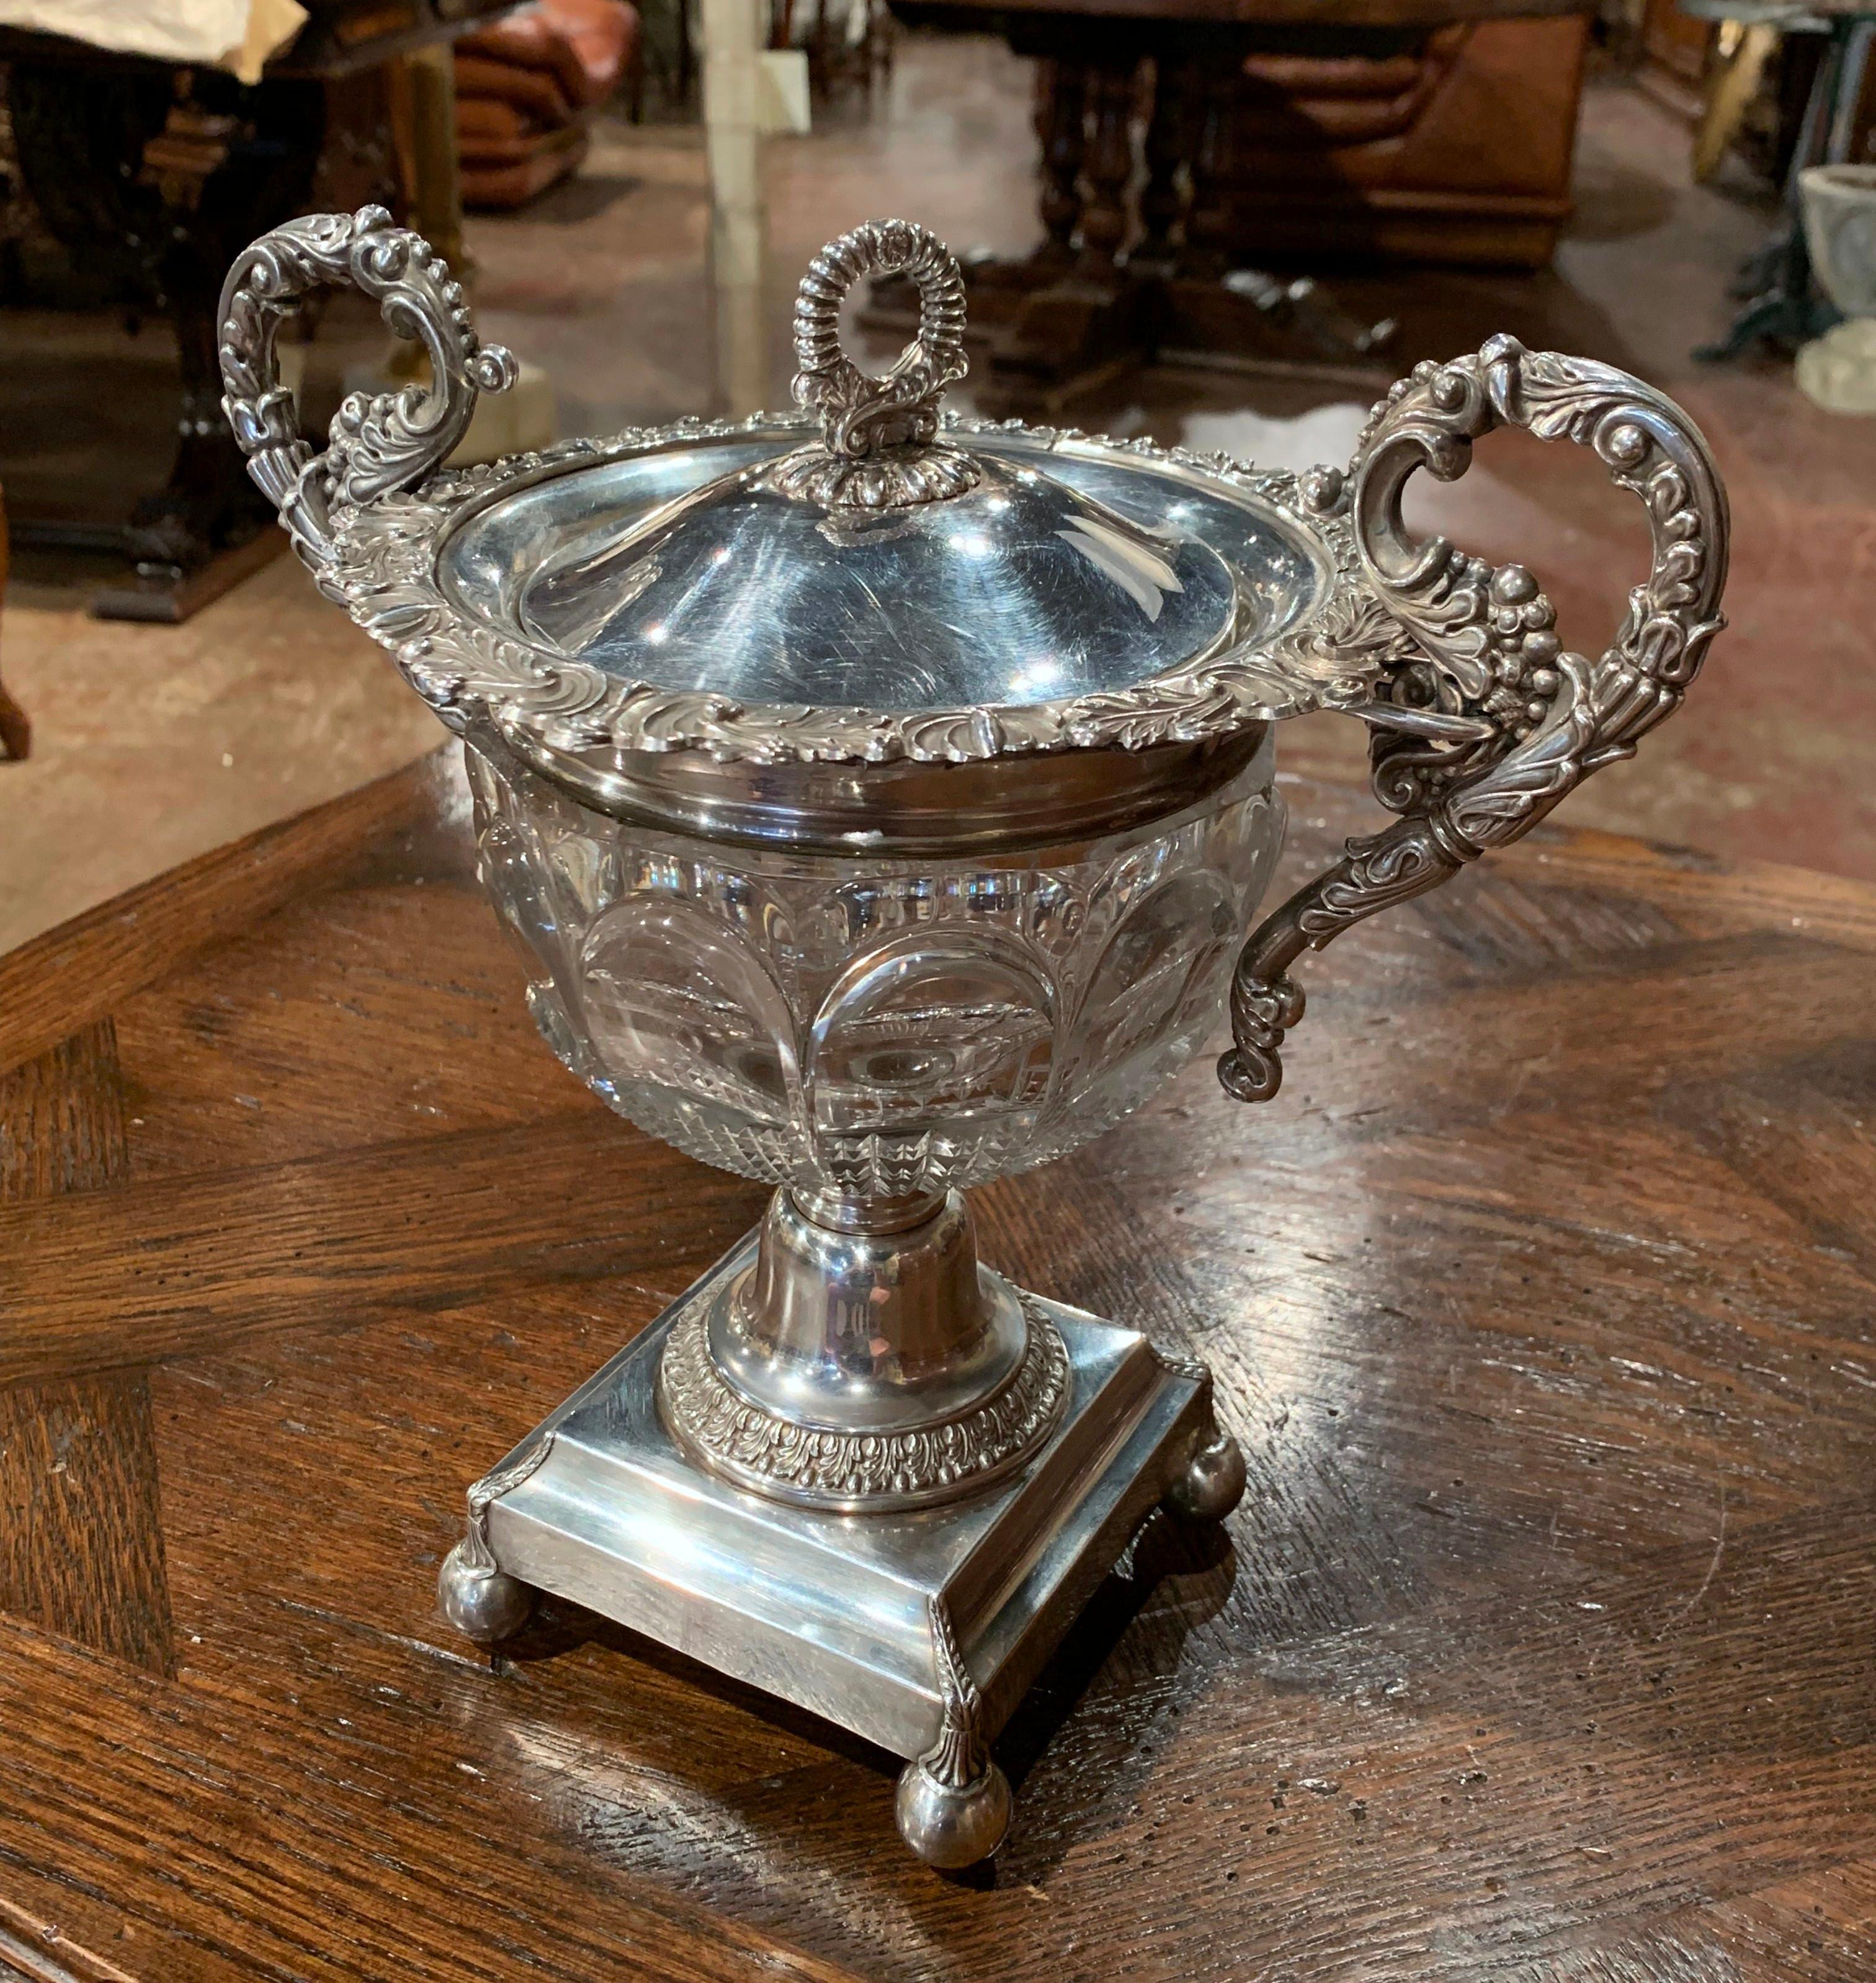 This elegant and large antique sugar bowl was crafted in France, circa 1870.; made of cut crystal and silver plated over copper, the dish sits on a square base over round feet. It features two intricate handles decorated with leaf and fruit motifs,